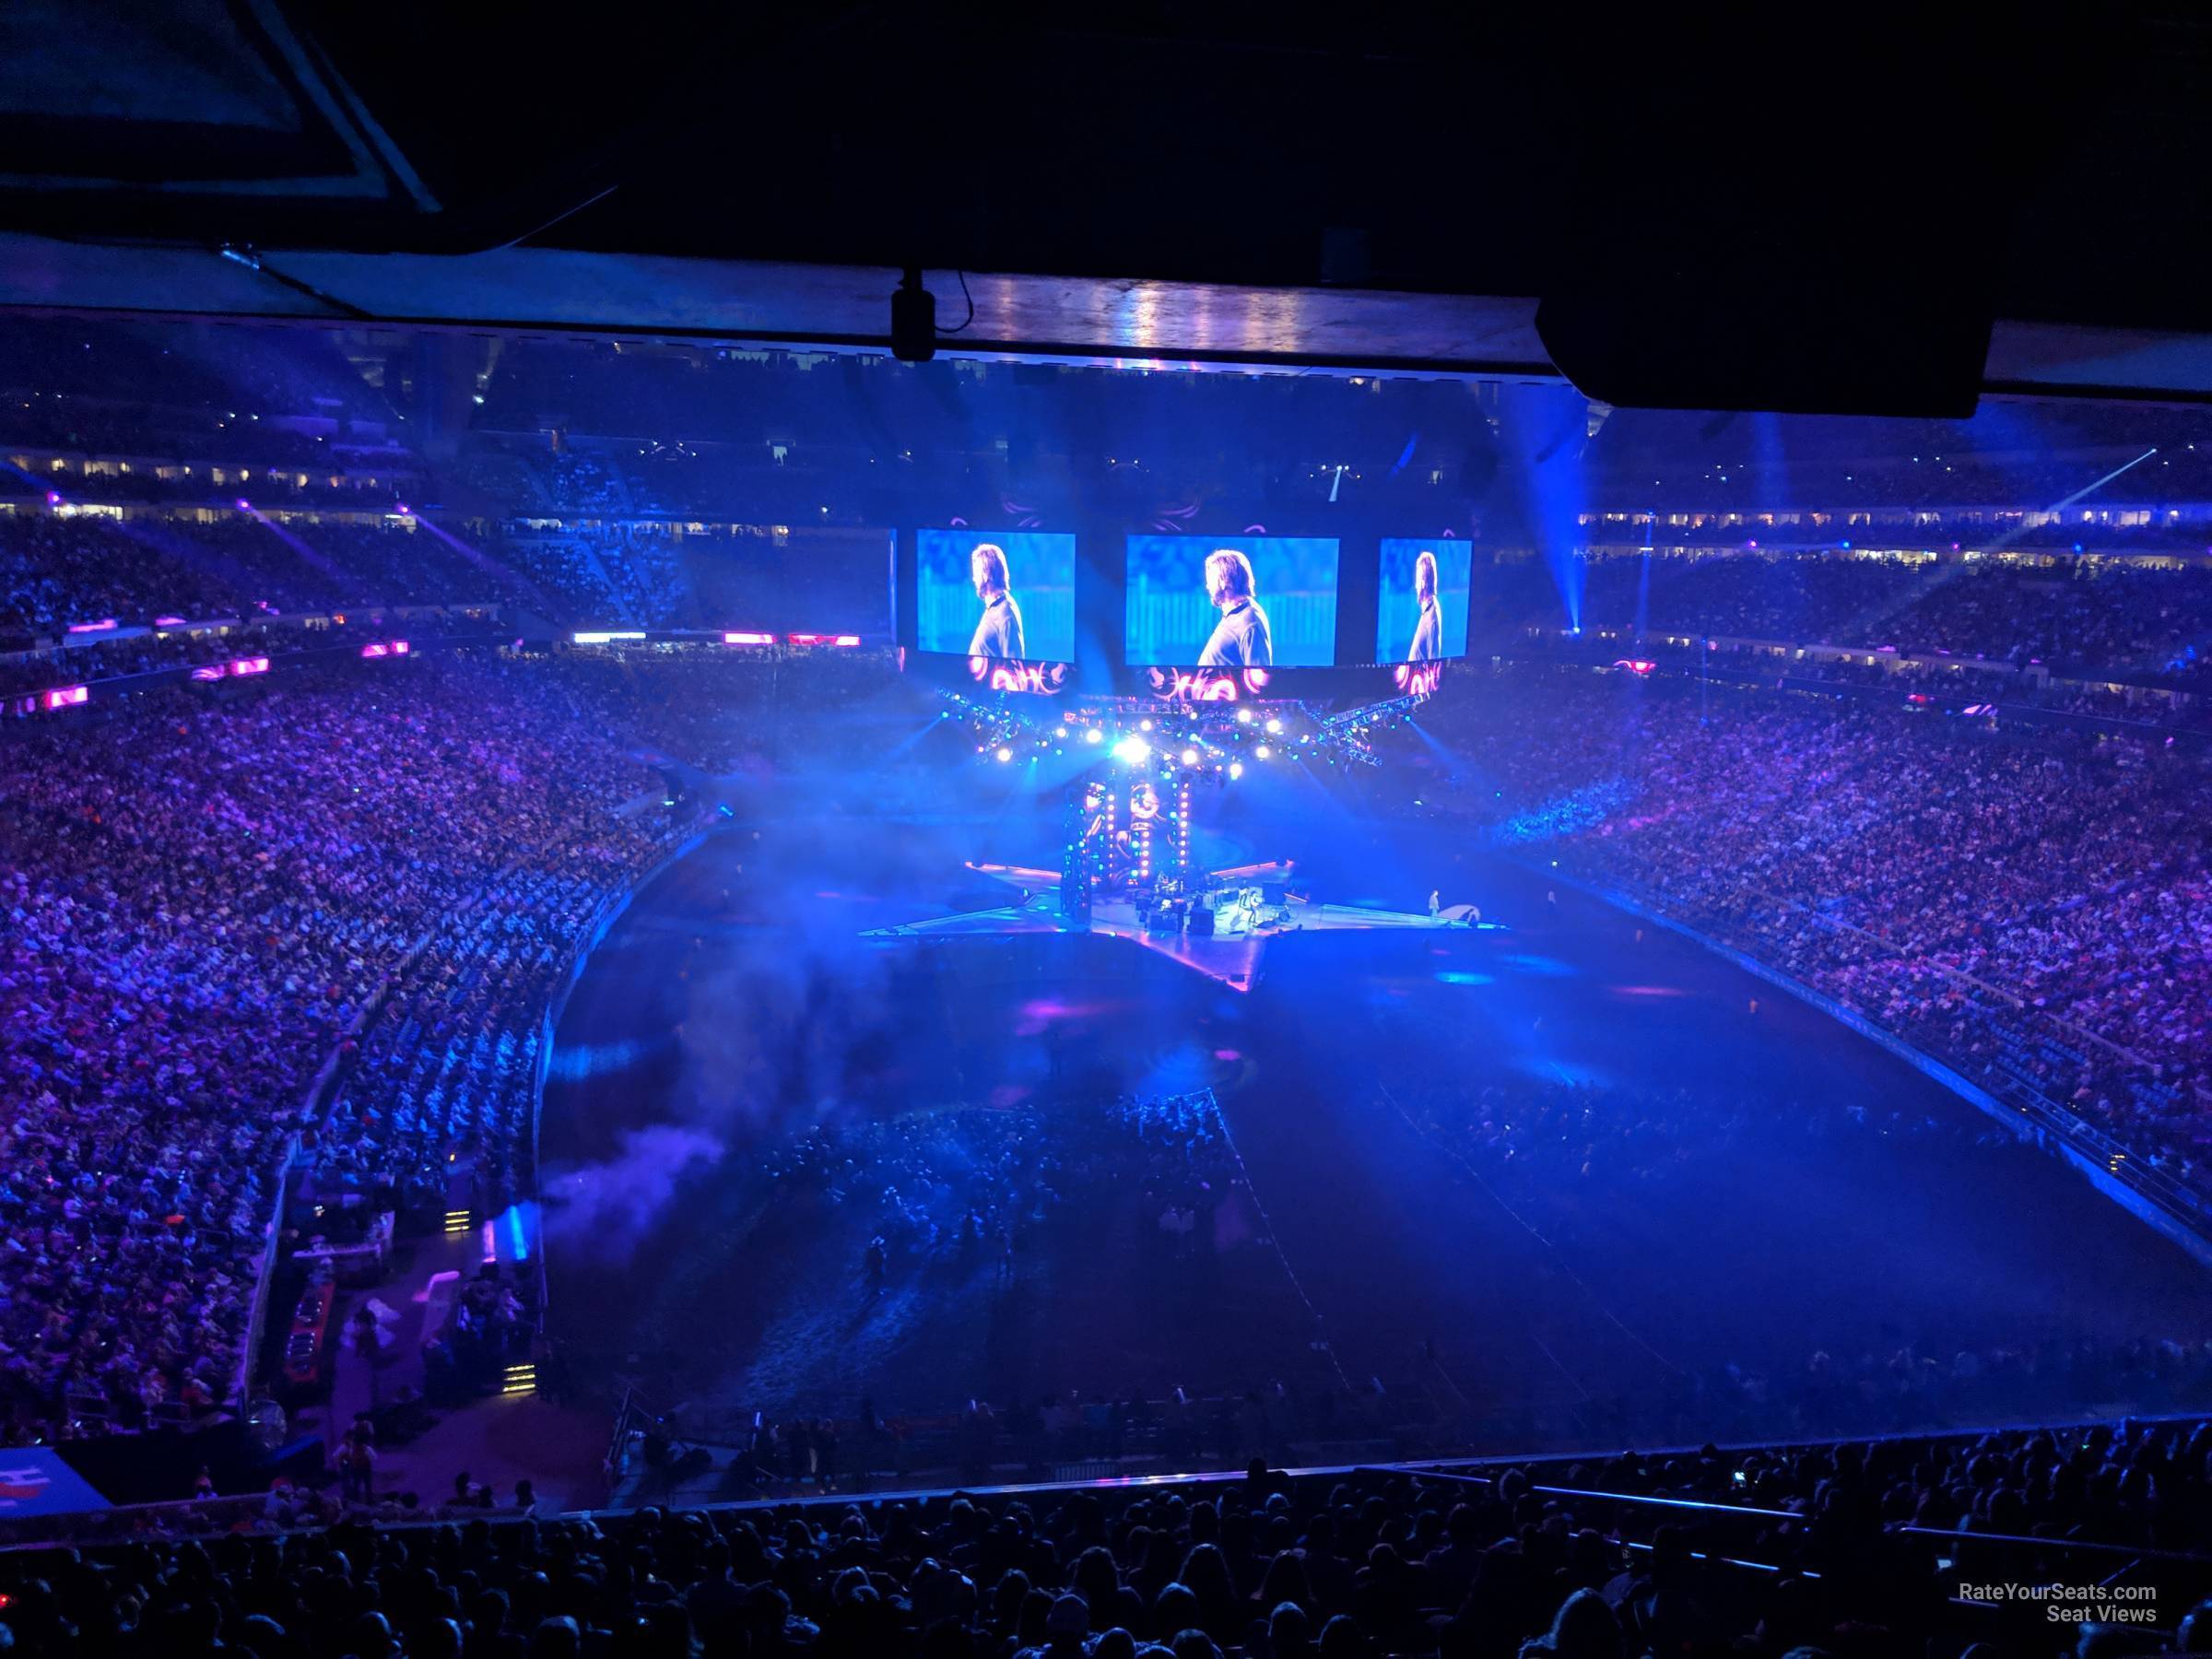 section 326, row m seat view  for concert - nrg stadium